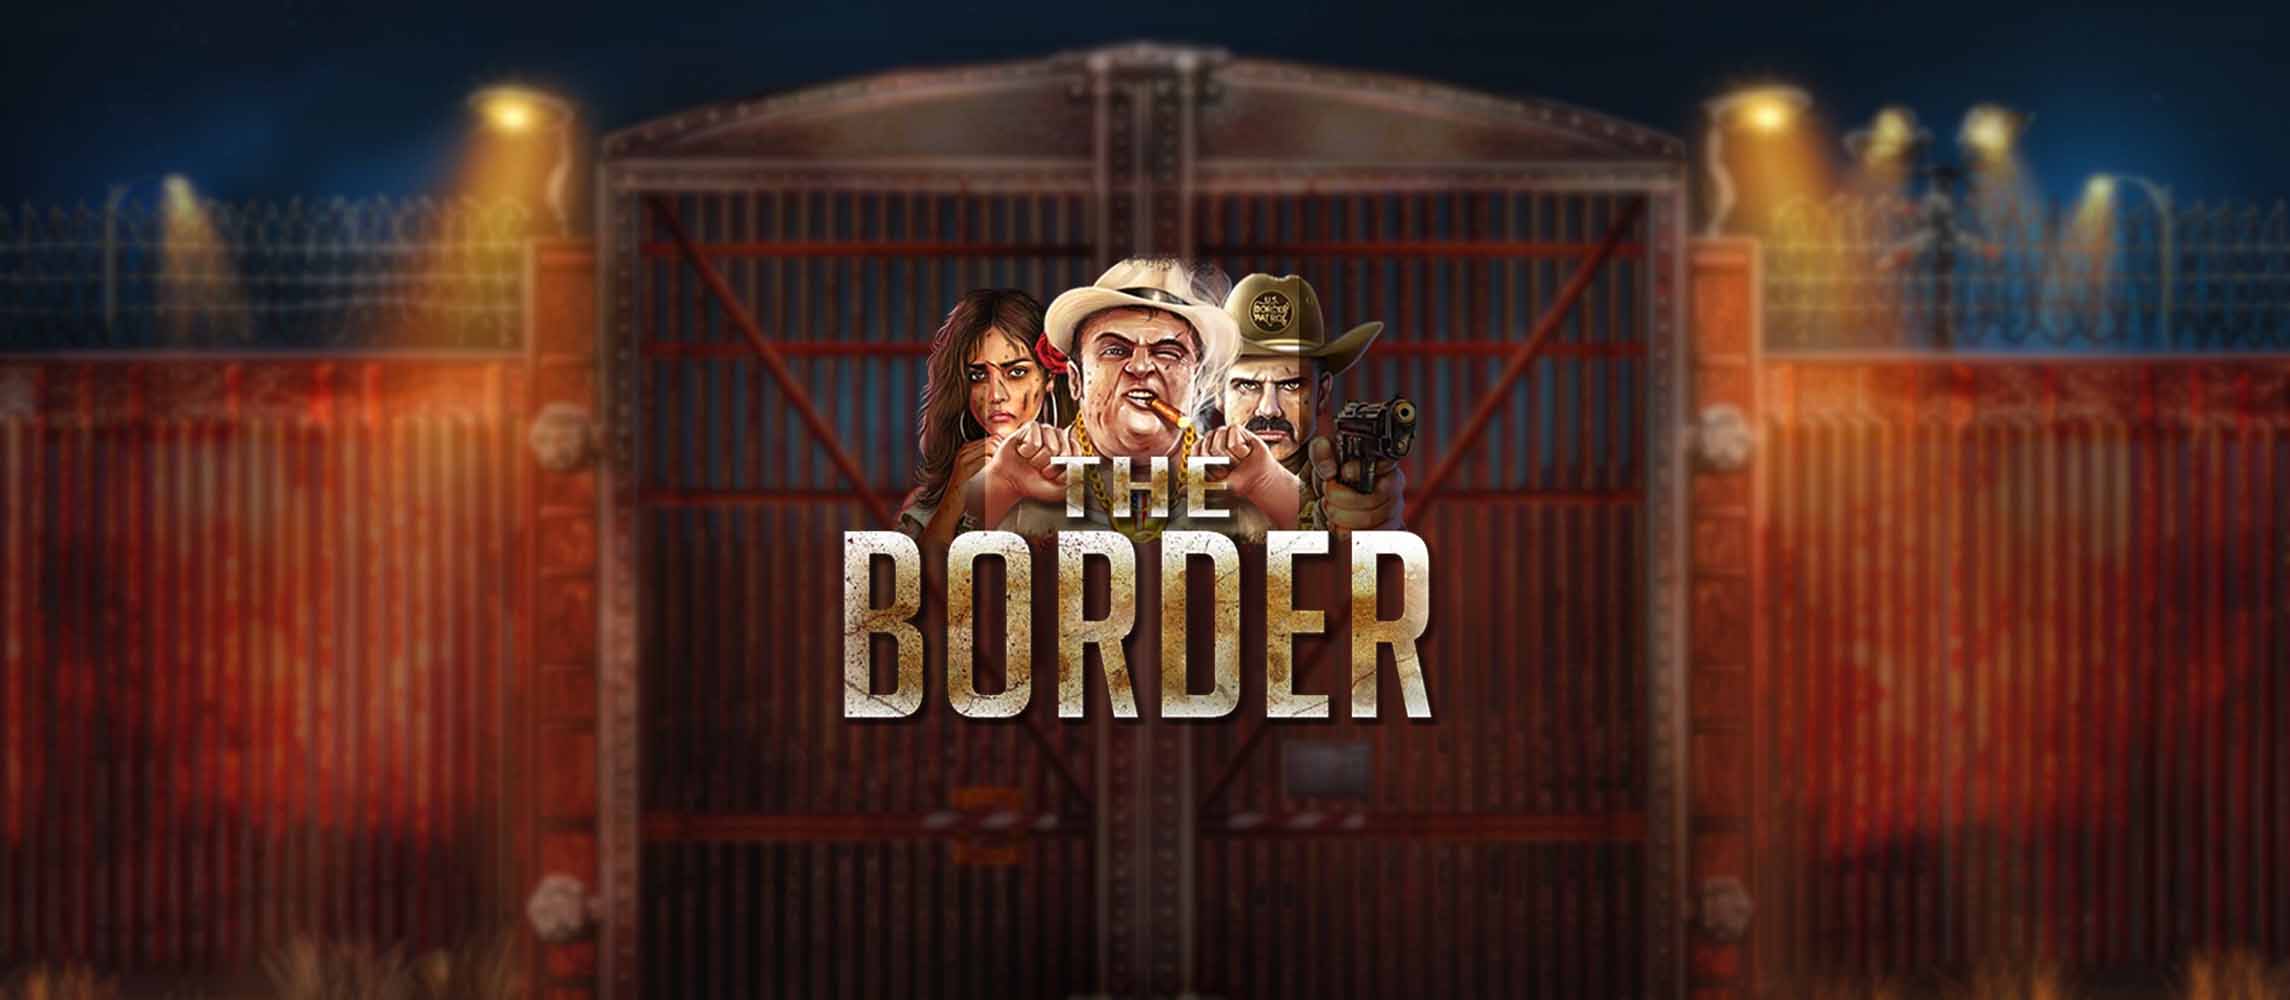 The Border by No Limit